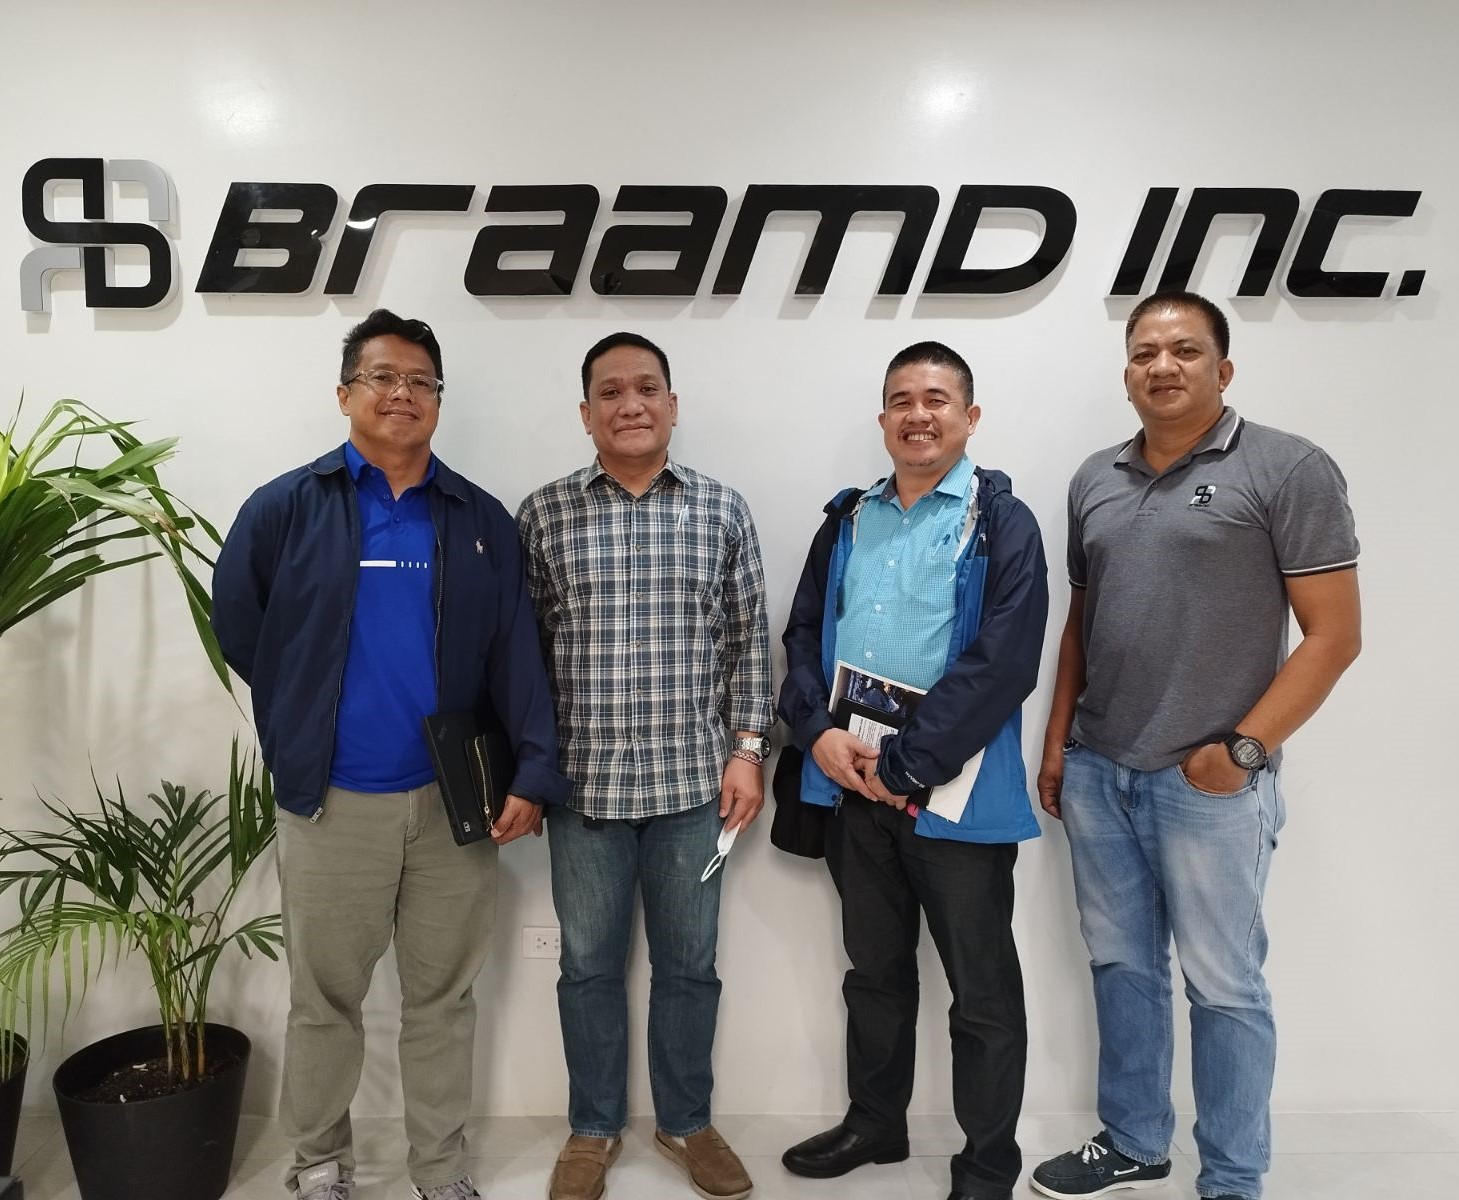 Thank you very much ABB Philippines for visiting Braamd Inc. HQ here in Santa Rosa Laguna. To Mr. Jojo Mendoza - ABB Country Manager, Mr. Joseph Navarro - ABB Sales Manager, and Mr. Fernando Veloso - ABB Sales Specialist, thank you very much. We're looking forward to planning great things with you for ABB Motion Business.